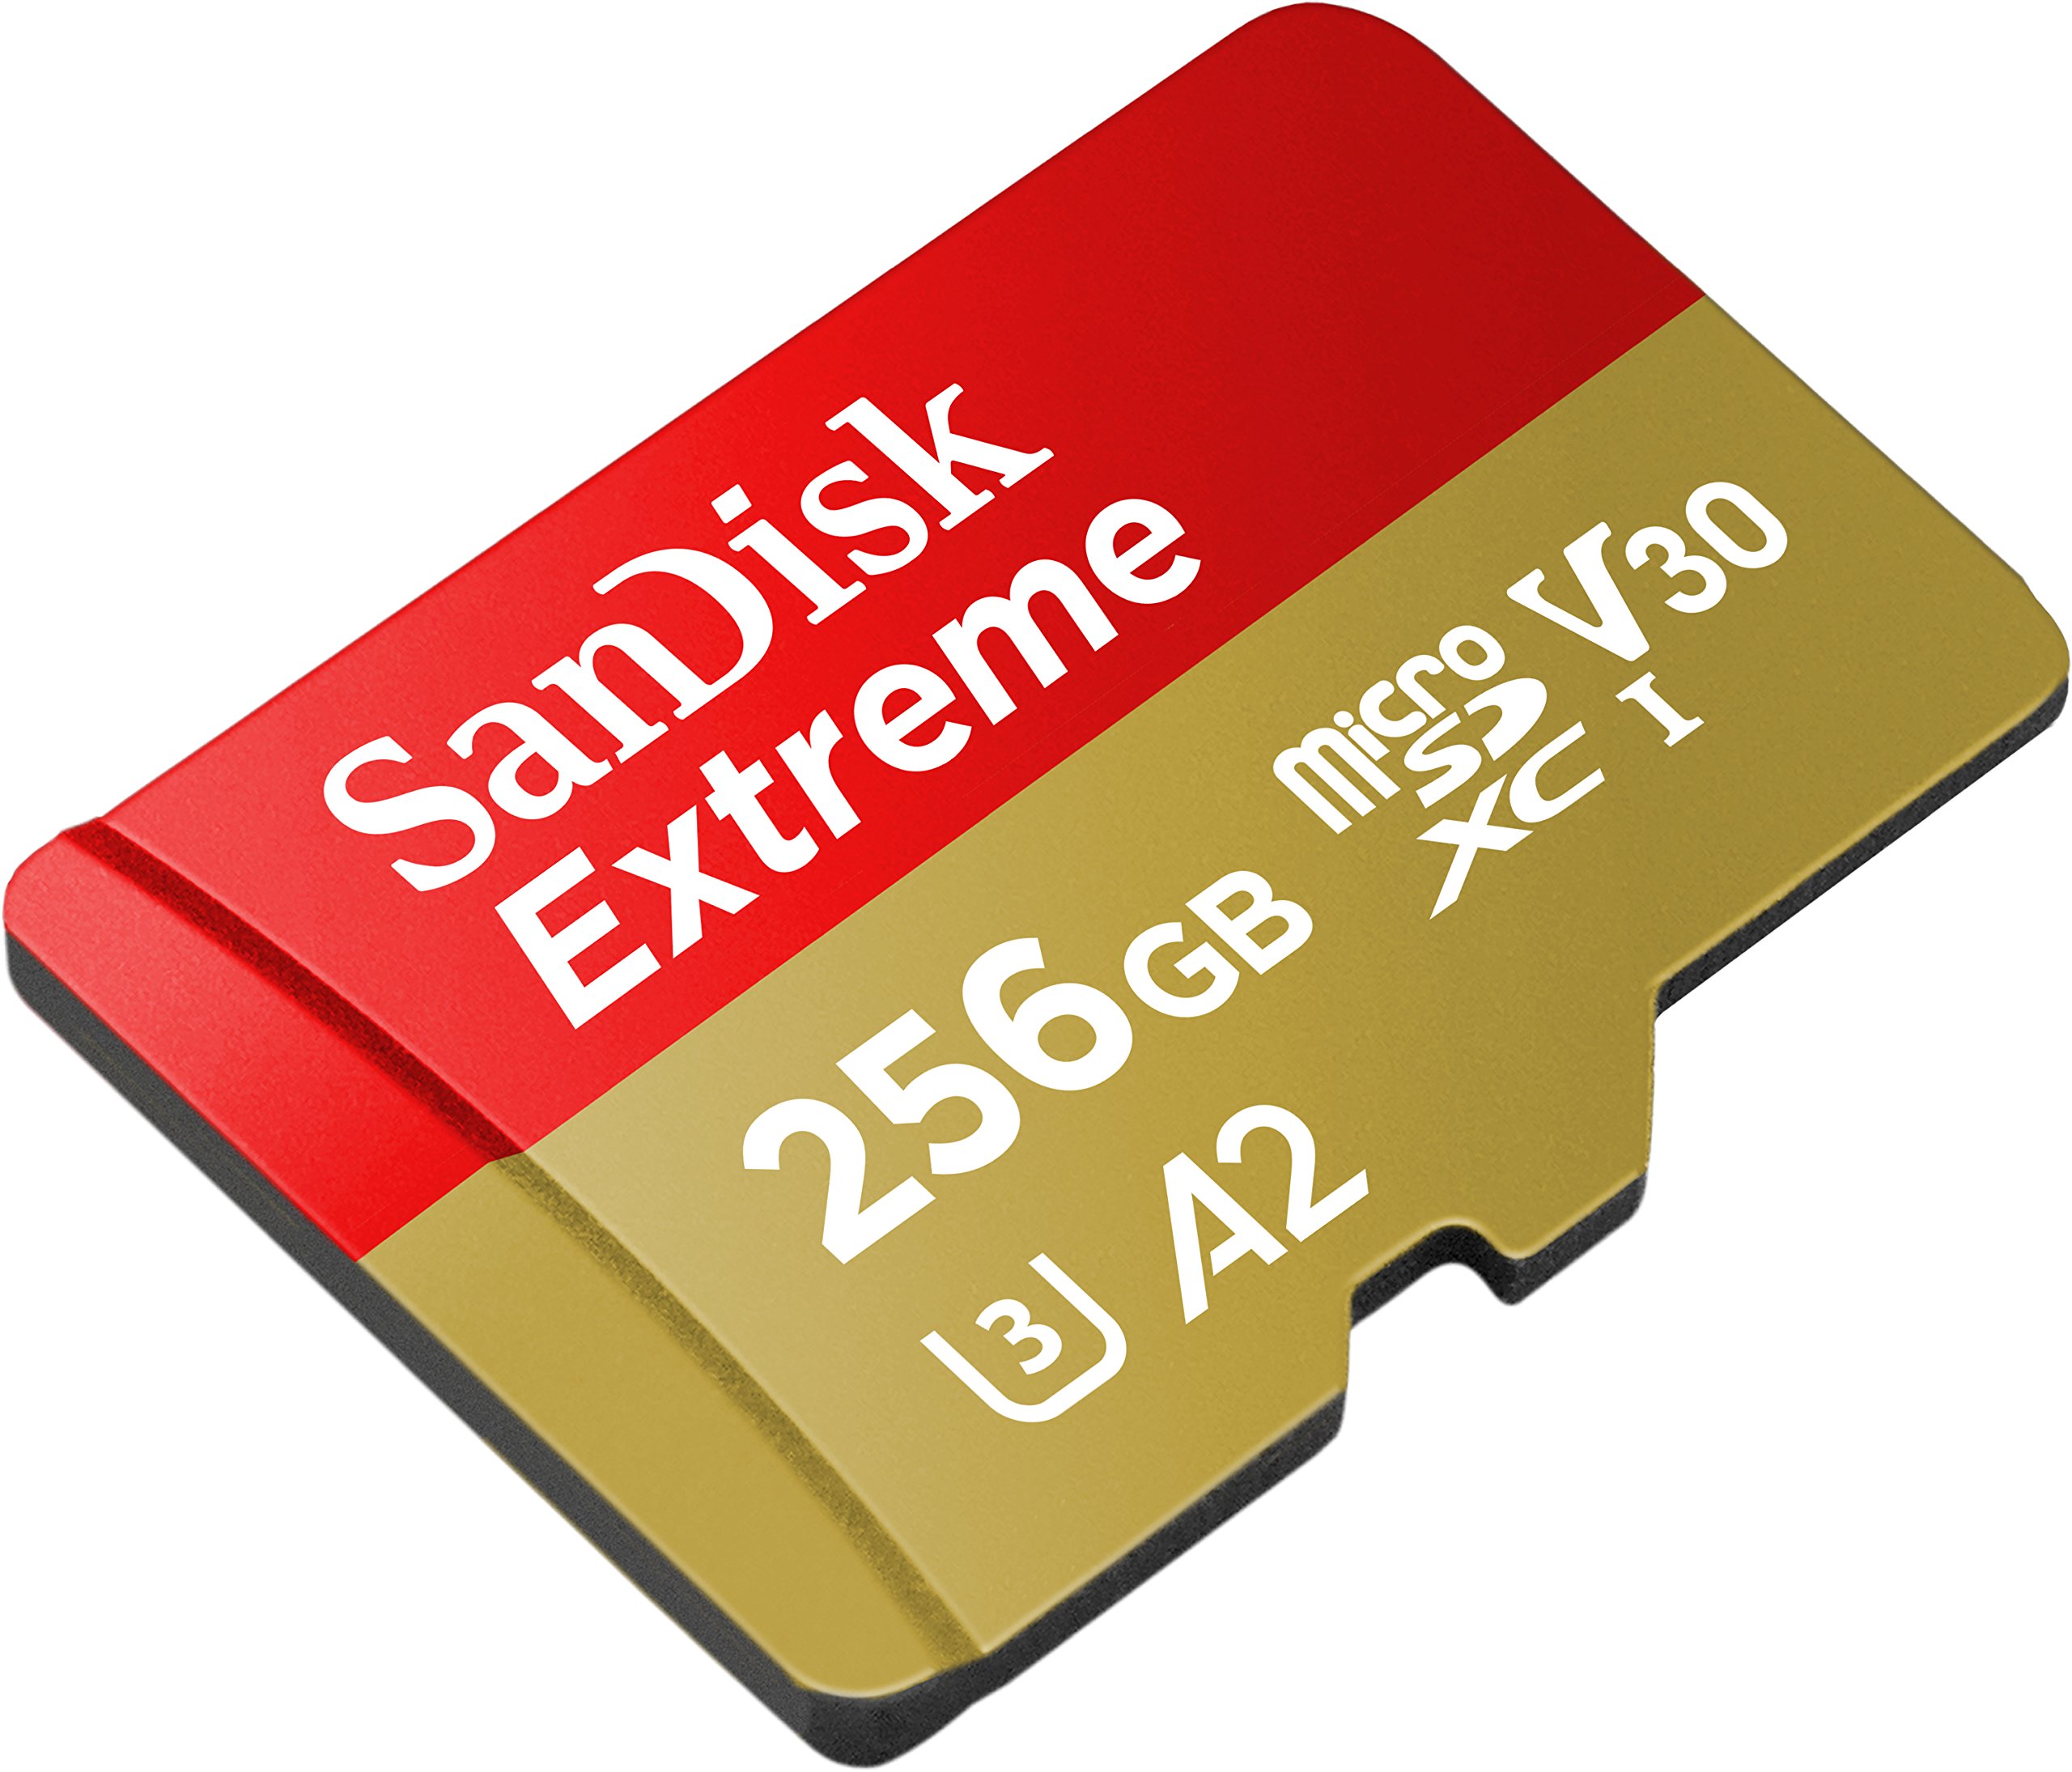 SanDisk 256GB Extreme microSDXC UHS-I Memory Card with Adapter - 160MB/s, U3, V30, 4K UHD, A2, Micro SD Card - SDSQXA1-256G-GN6MA - image 4 of 6